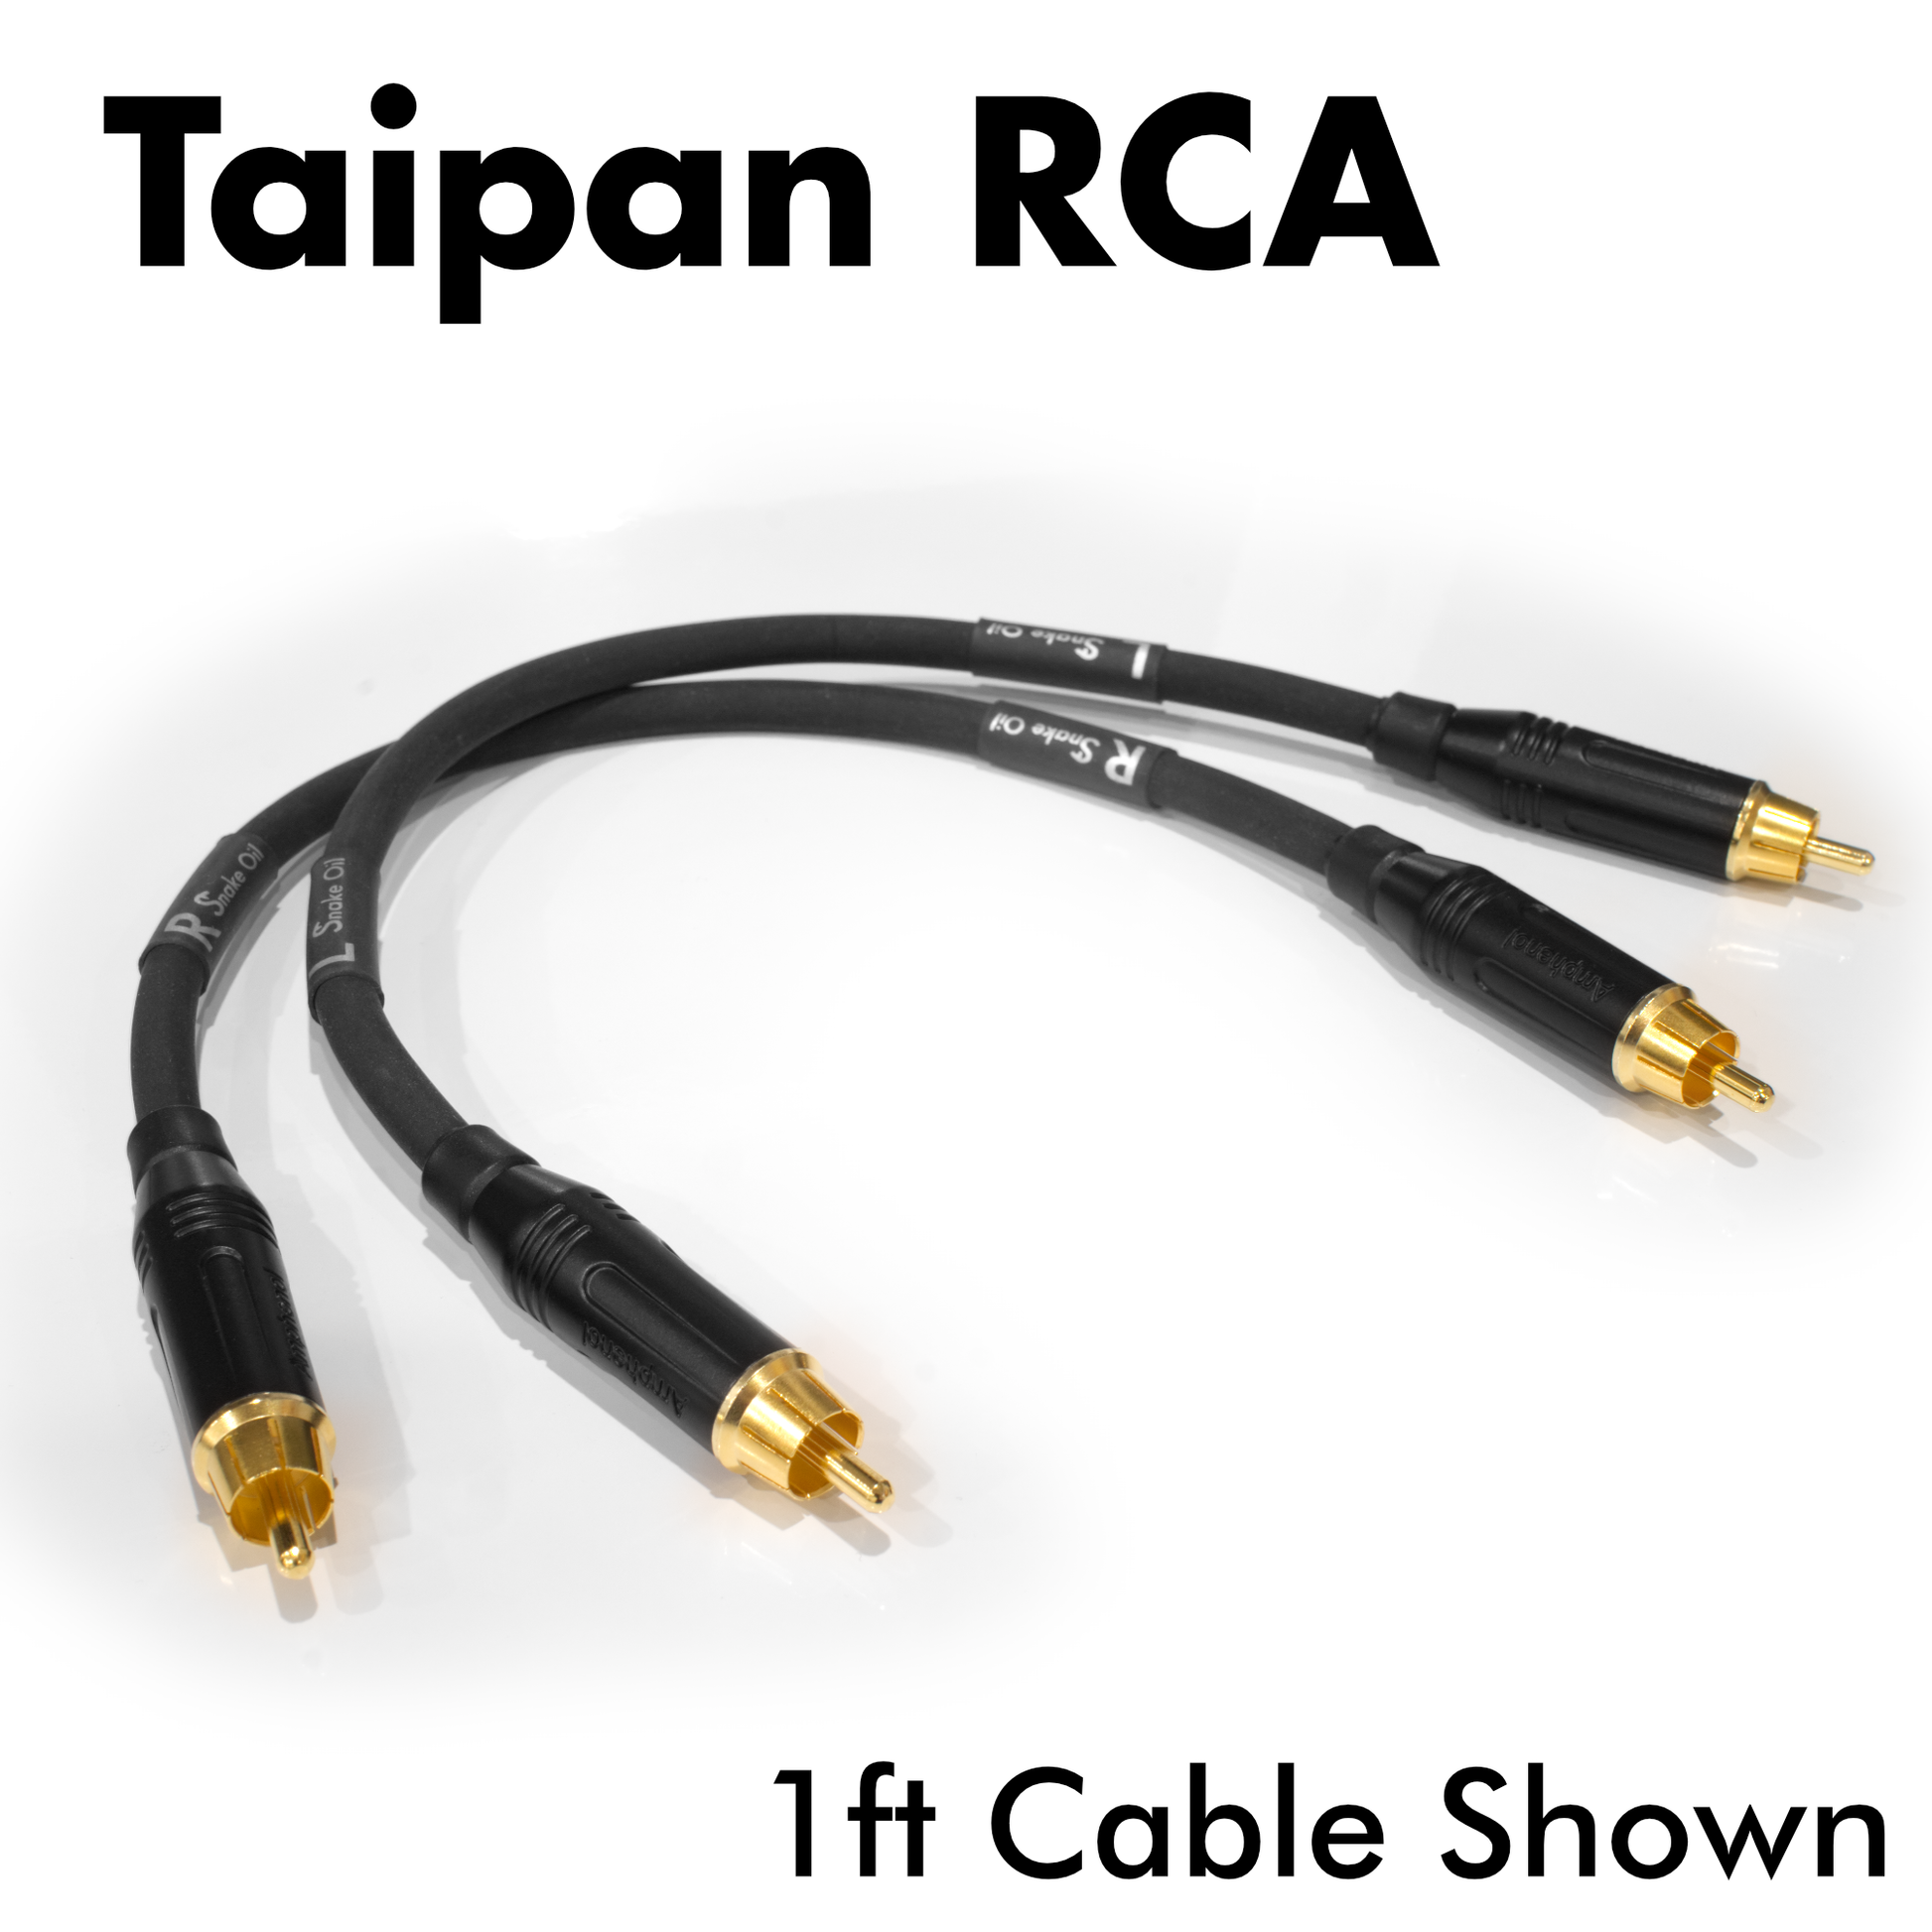 Pair of Taipan RCA Cables (6 in - 25 ft) – Snake Oil LLC